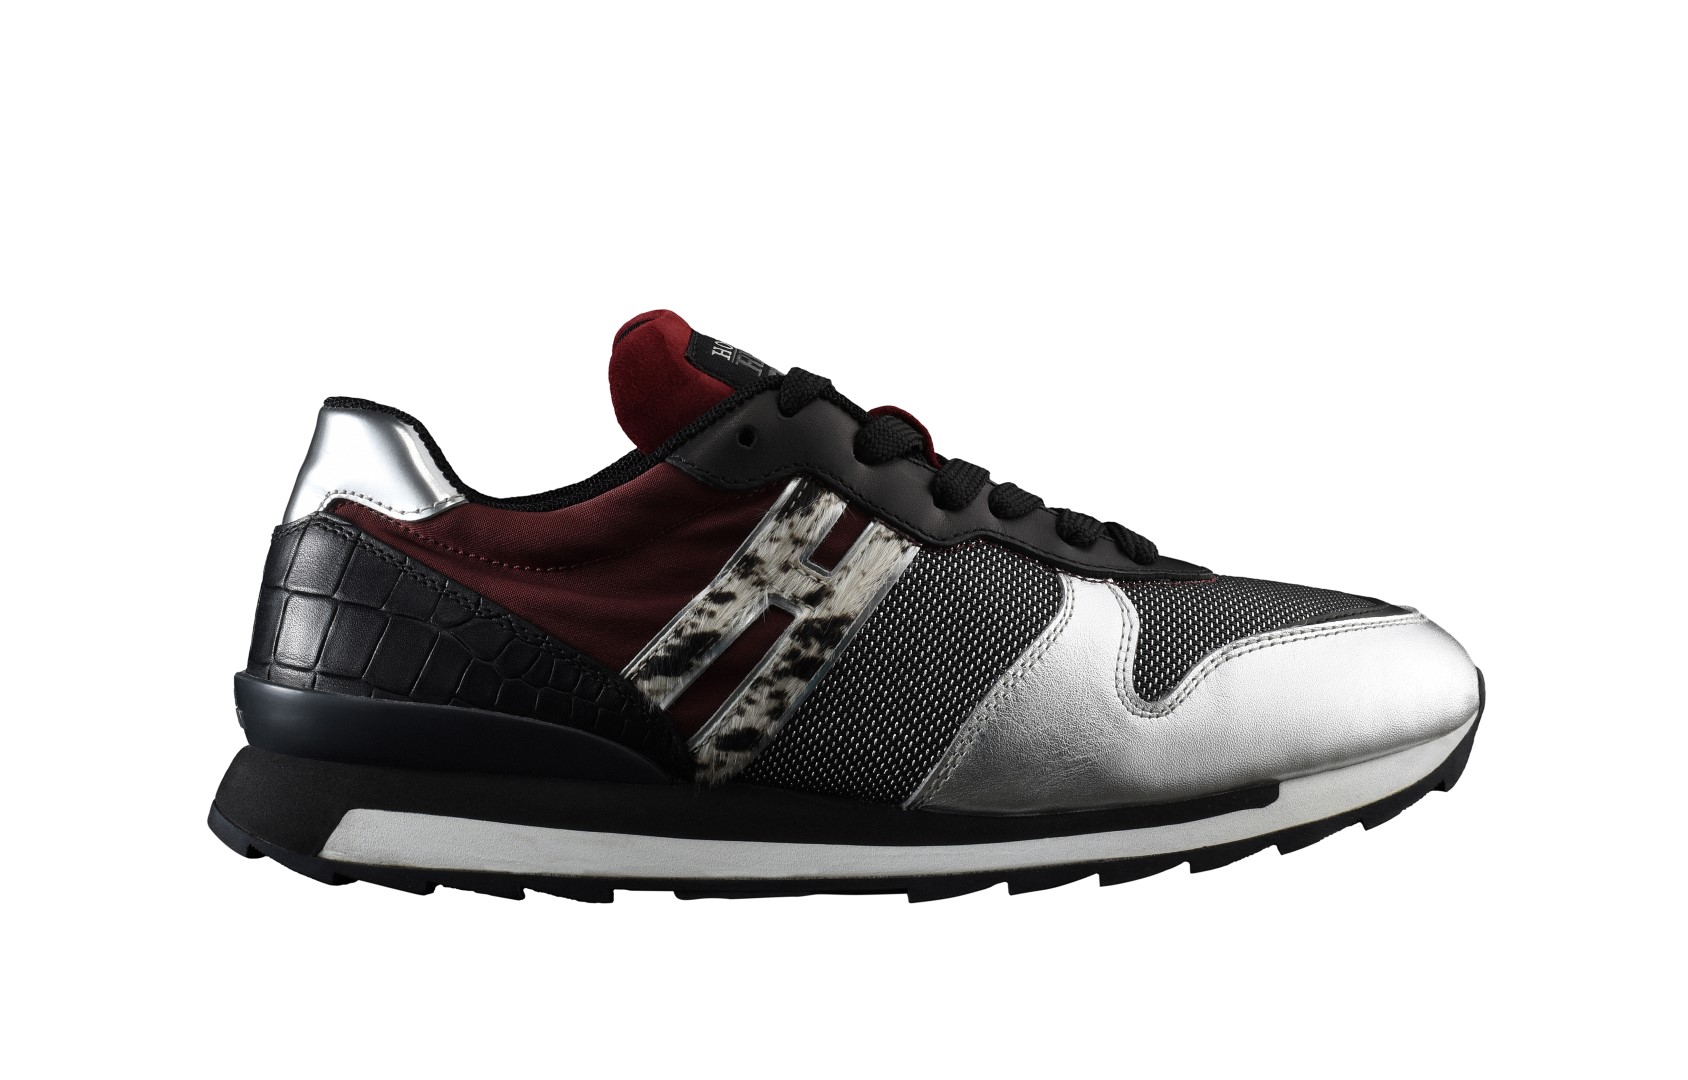 Hogan Rebel autunno inverno 2015 2016: le sneakers in limited edition by Les Twins, video e foto